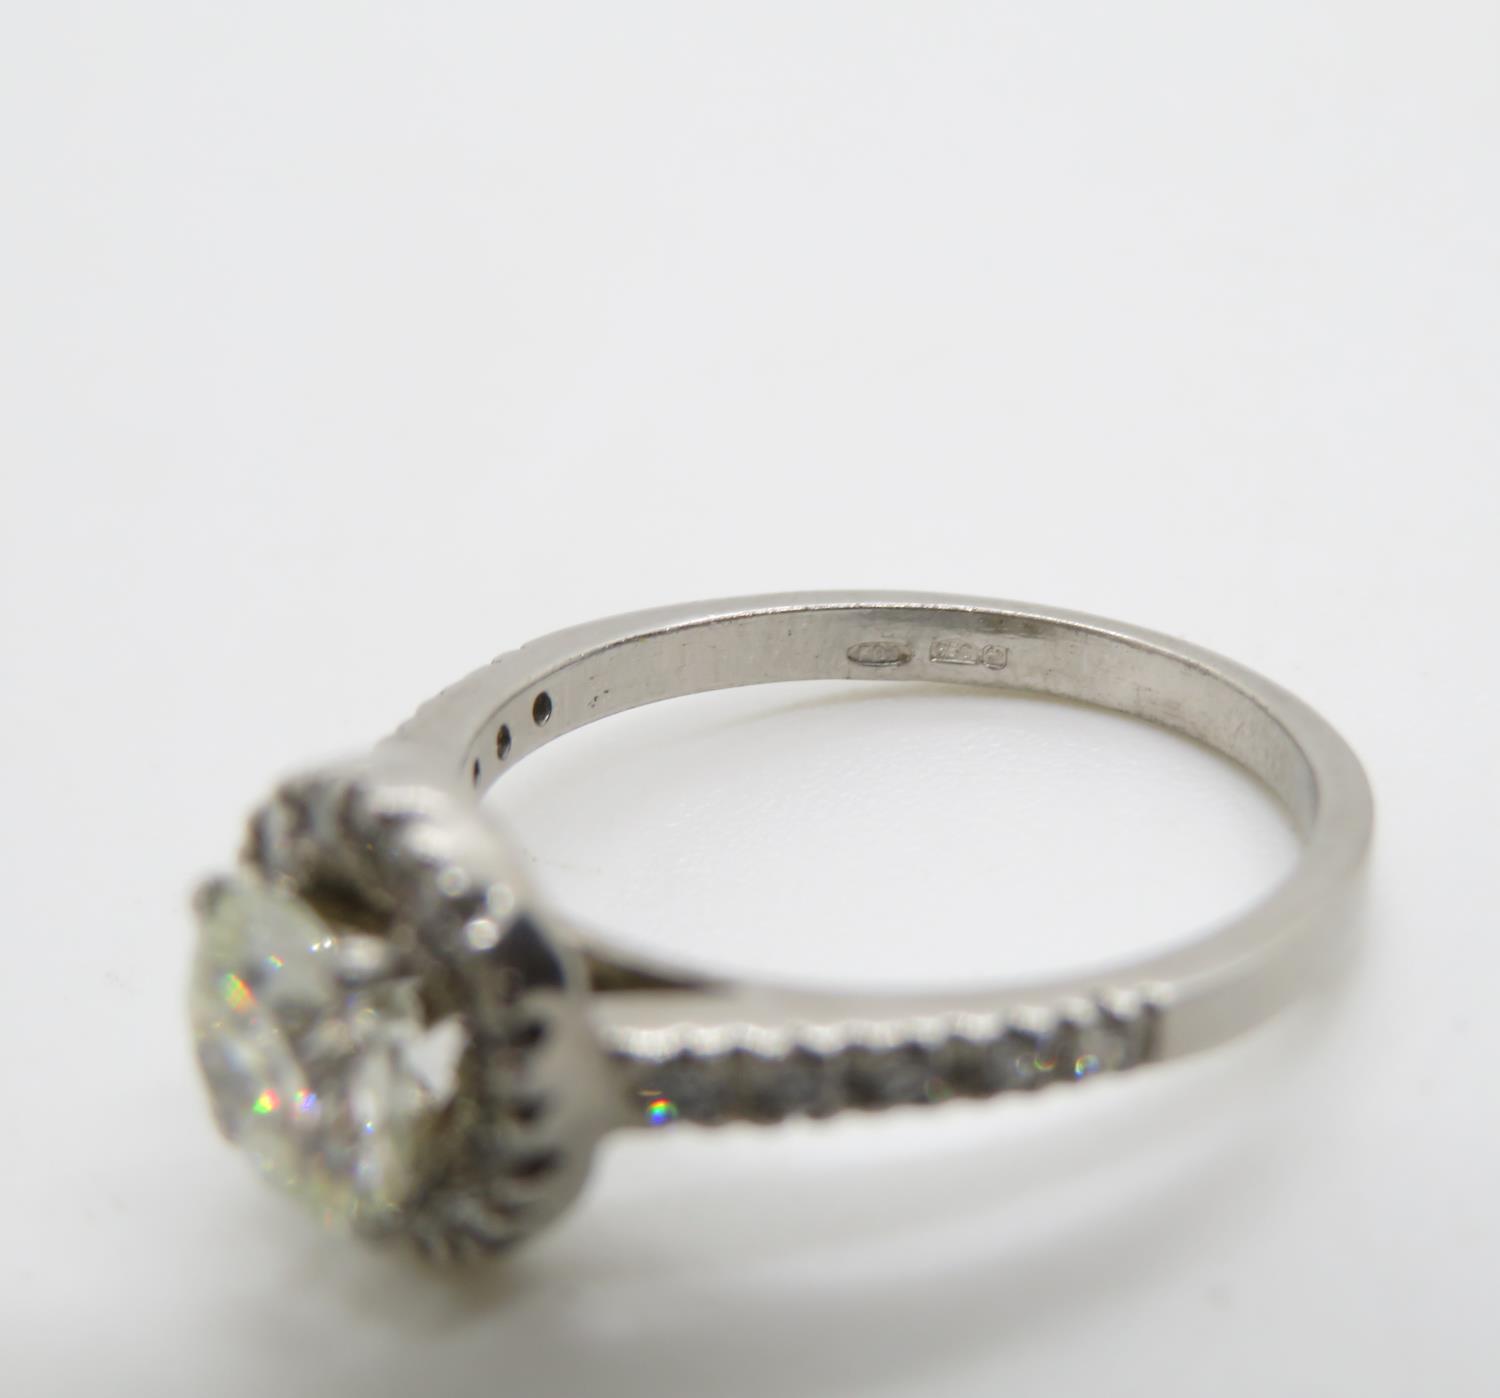 1ct diamond and platinum halo solitaire ring size M I/J colour SI2 clarity - Image 4 of 4